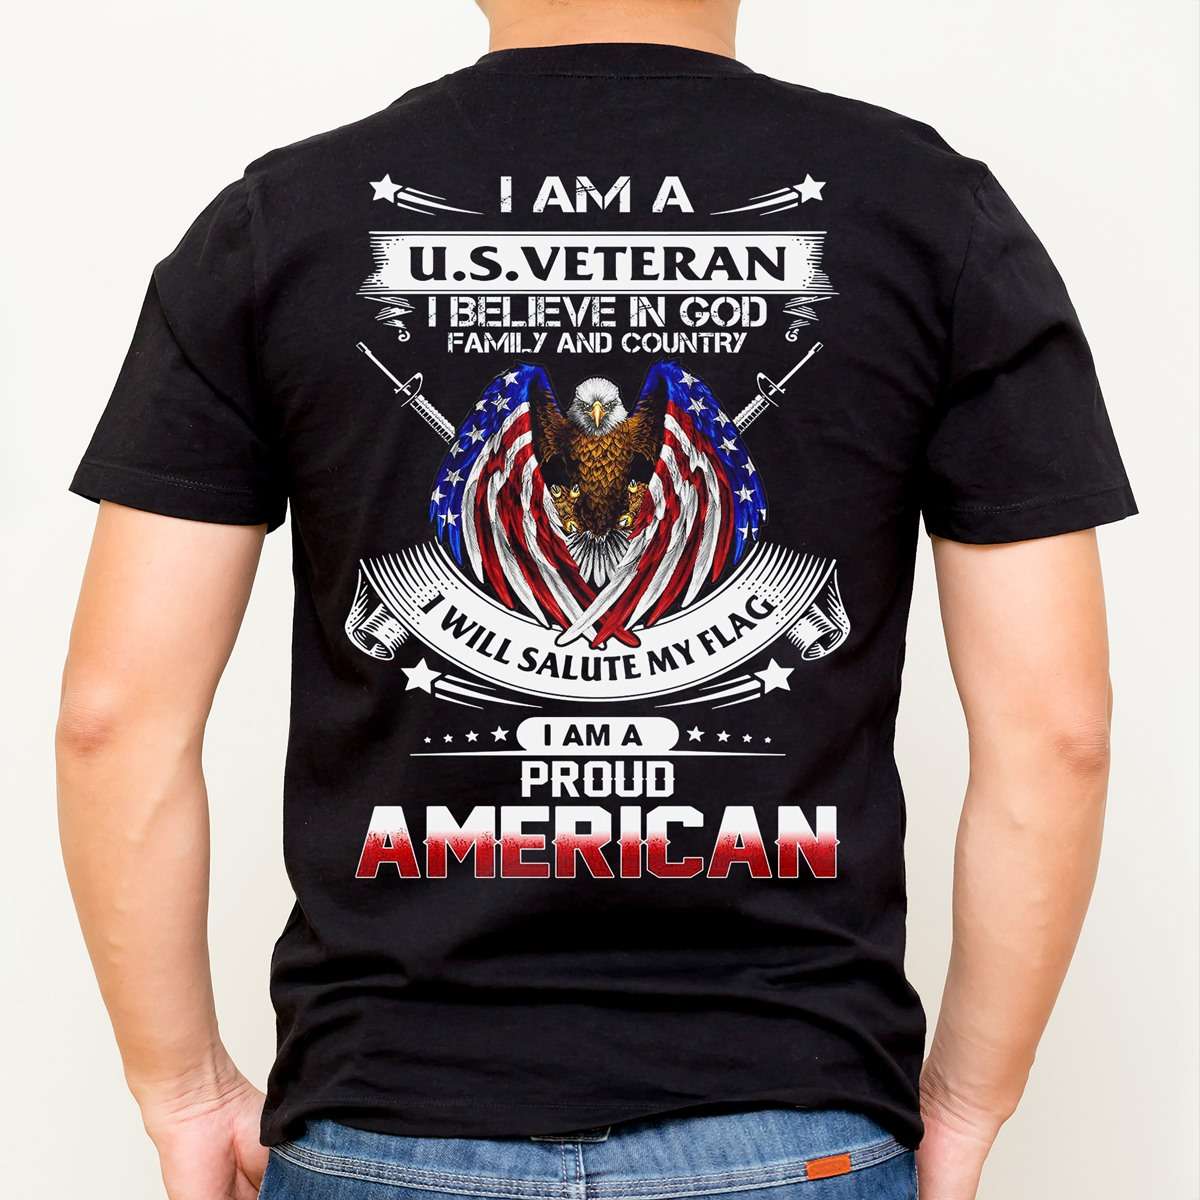 I am a US veteran I believe in god, family and country, I will salute my flag, proud American